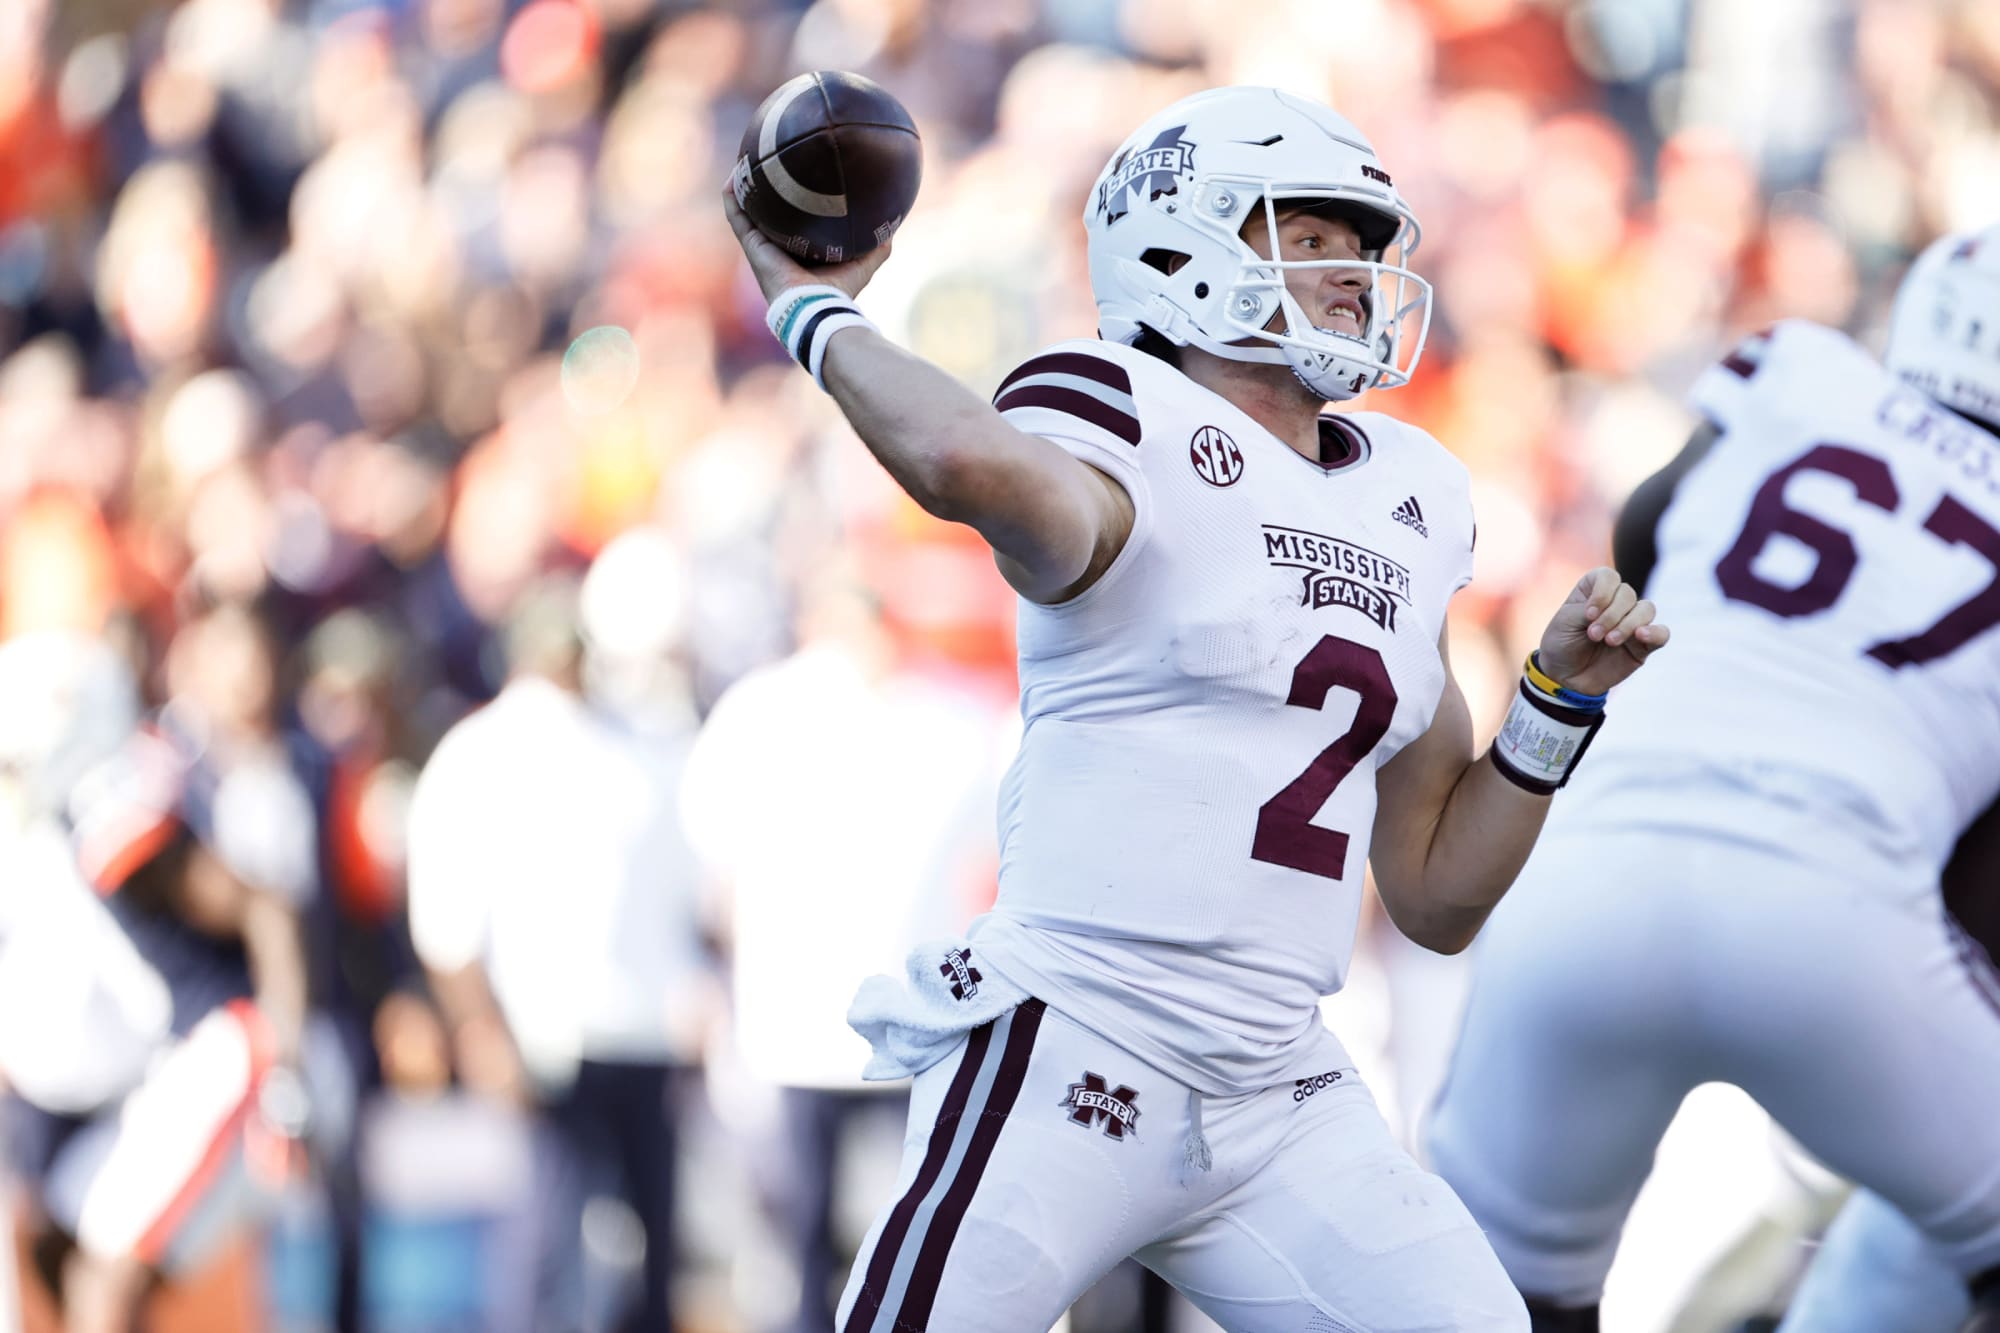 Mississippi State projected to play Big 12 team in Texas Bowl